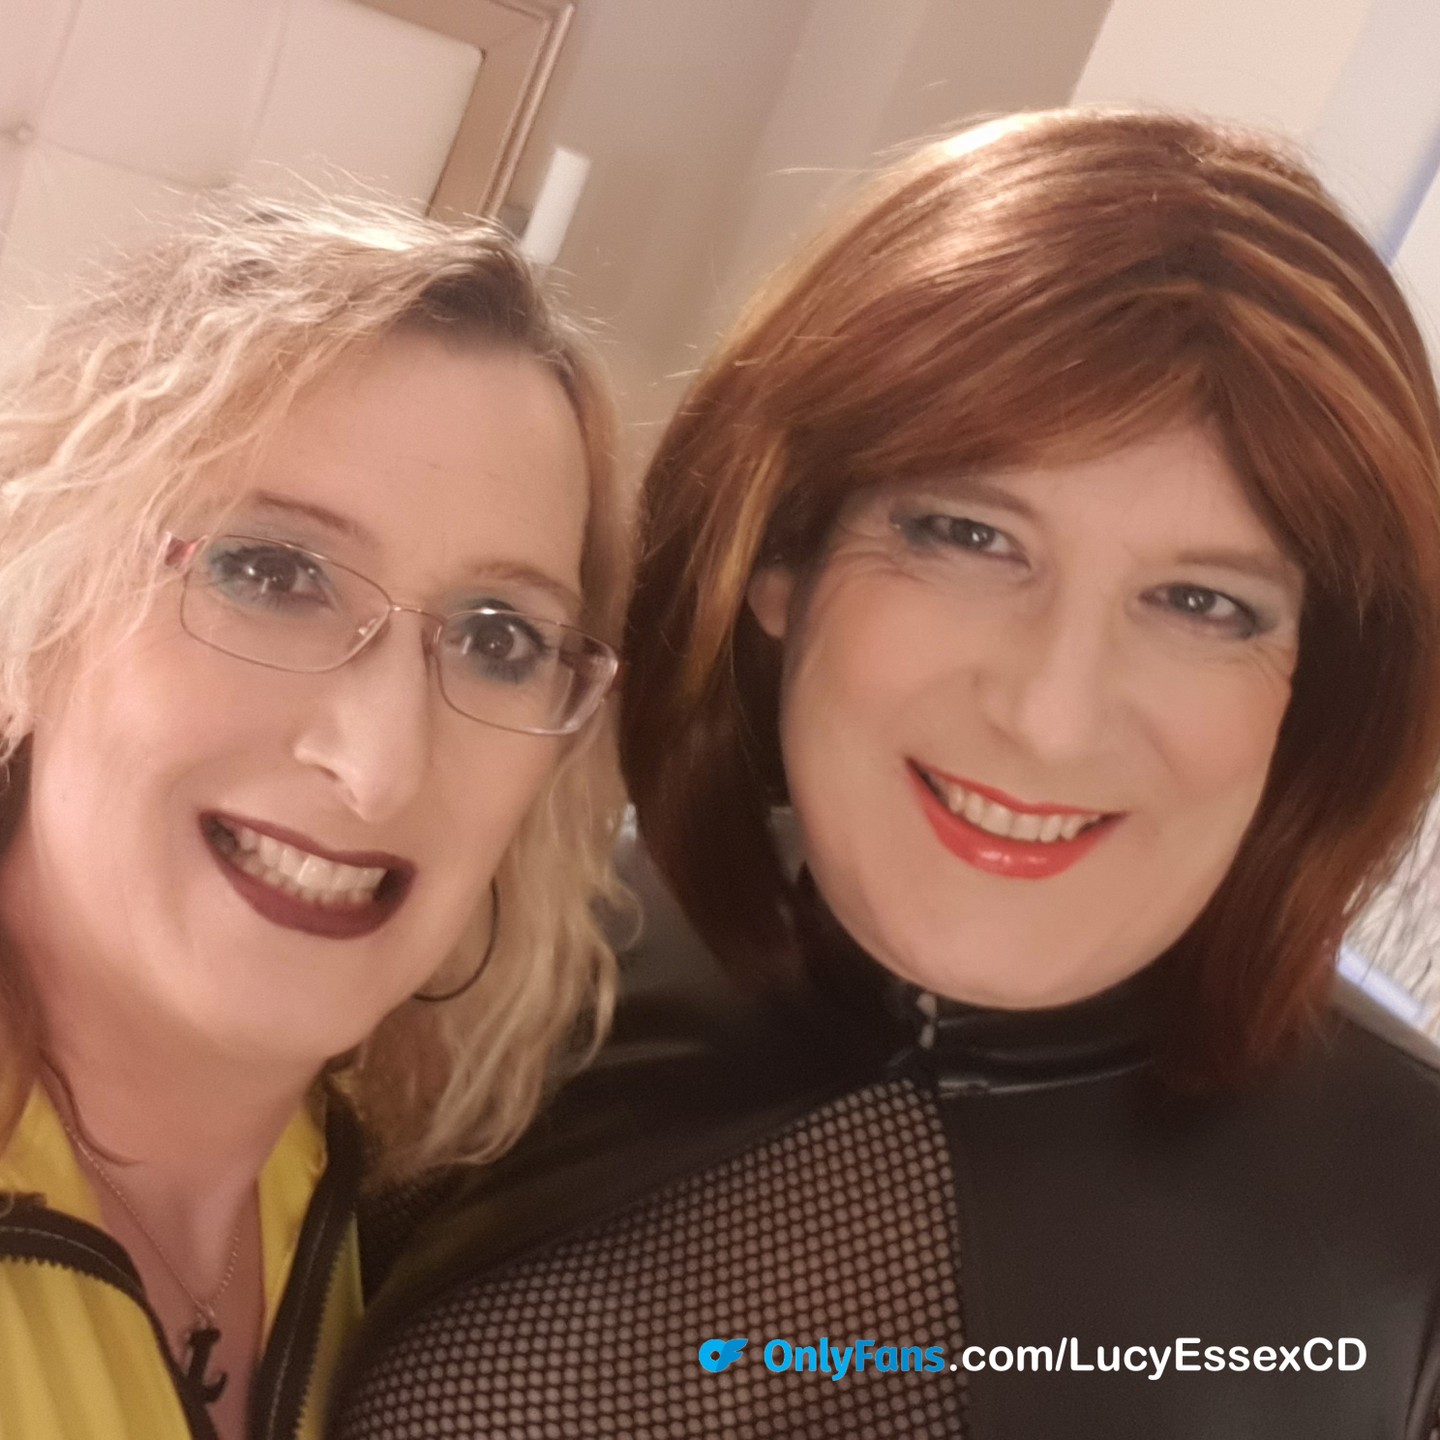 Ready for a night out with @essex_girl_lisa 

Check out my OnlyFans for more https://onlyfans.com/lucyessexcd

#tgirl #tgirleyecandy #tgirlsdoitbetter #tgirlselfie #tgirlselfies #tgirlsofinstagram #tgirlgoddesses #tgirlsarebeautiful #tgirldoitbetter #sexytgirl #crossdressing #crossdresseruk #crossdressers #crossdressed #lgbt #lgbtpride #lgbtq #trans #transisbeautiful #transpride #redhead